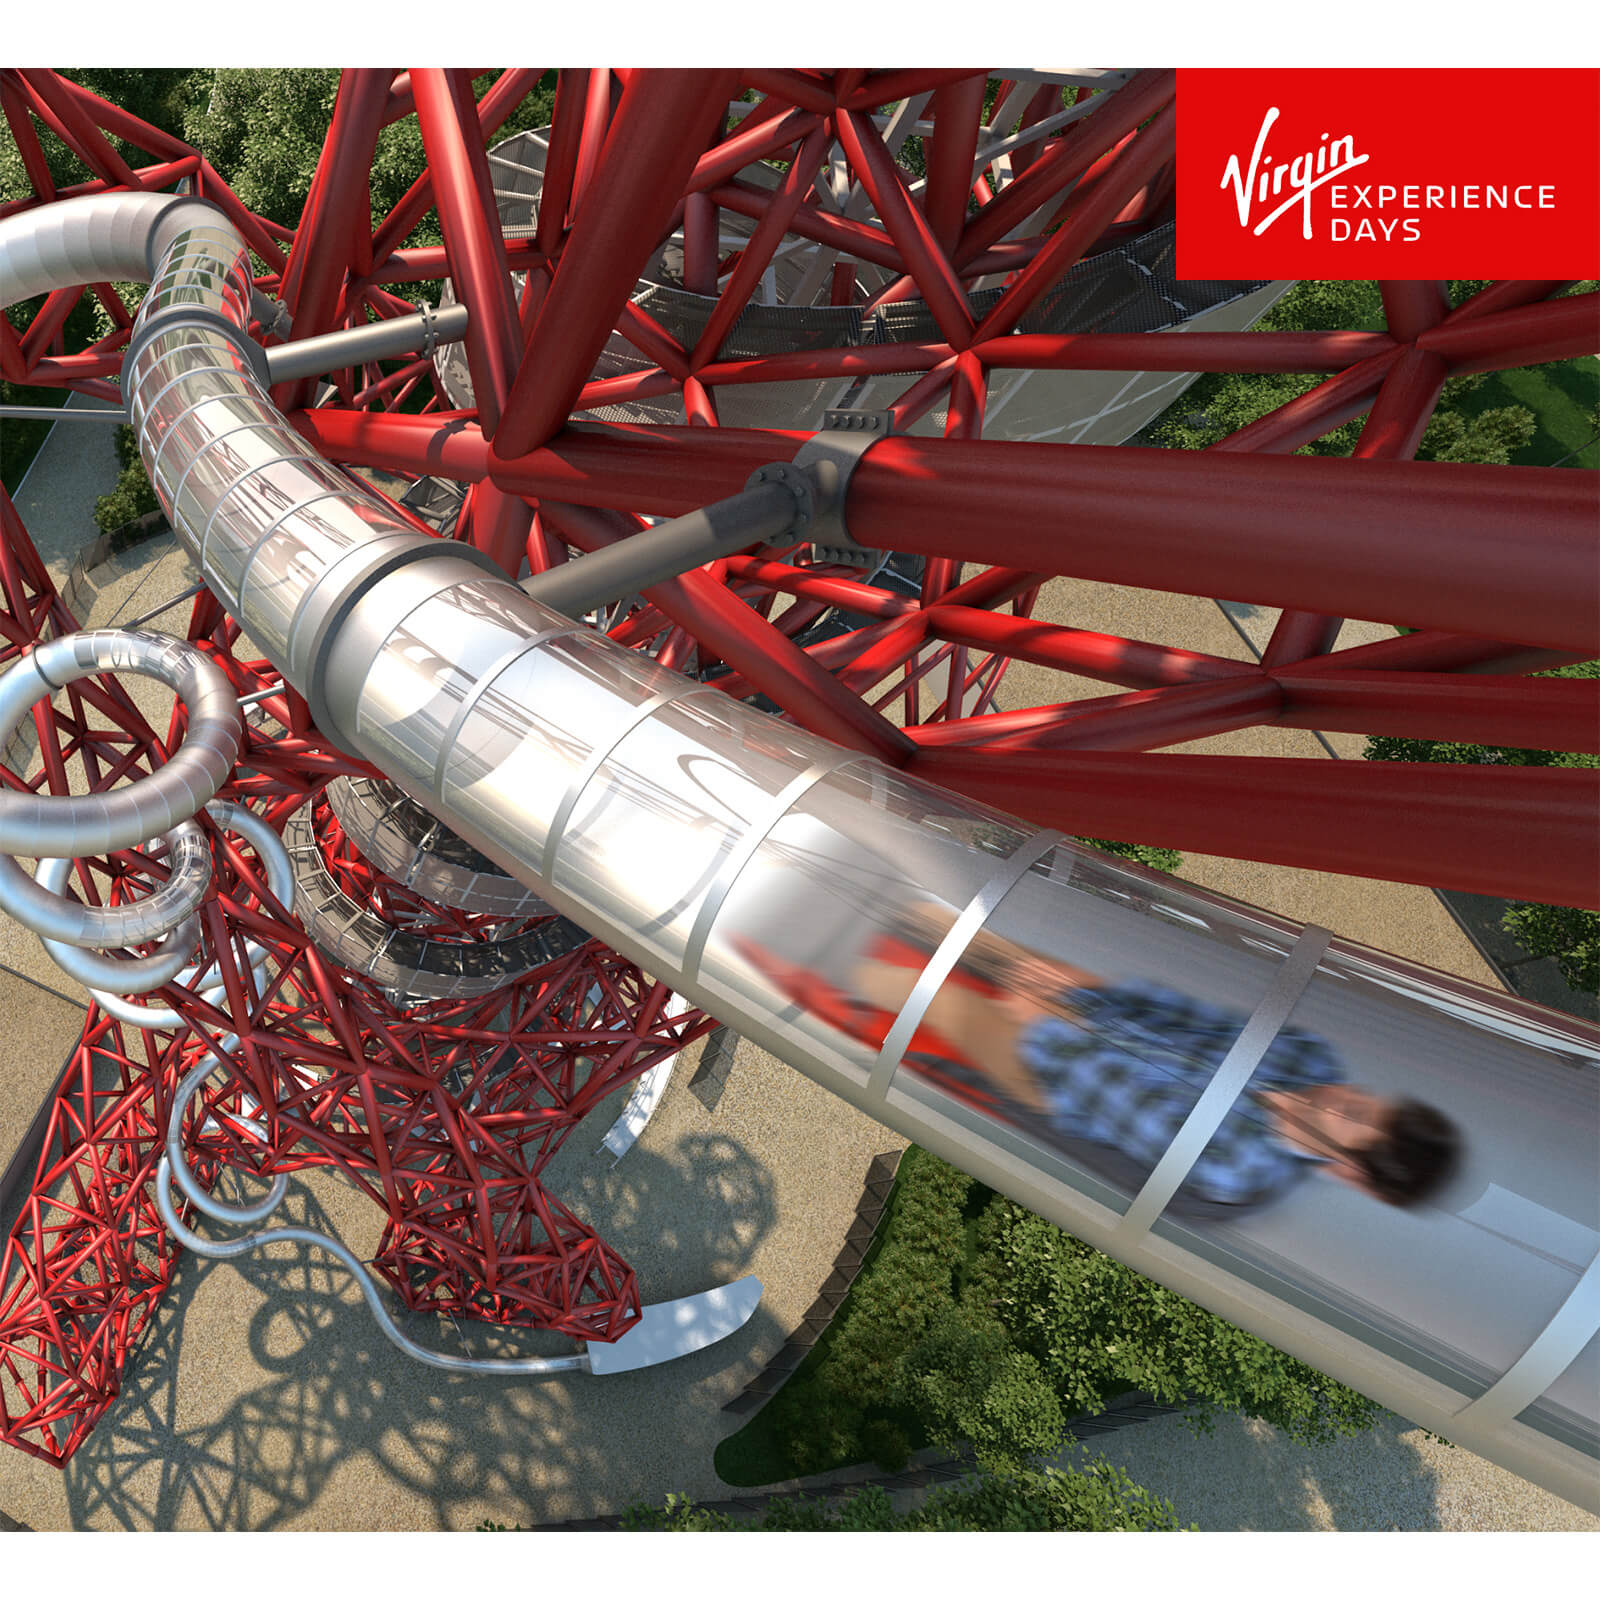 The Slide At The Arcelormittal Orbit For Two With A Bottle Of Prosecco